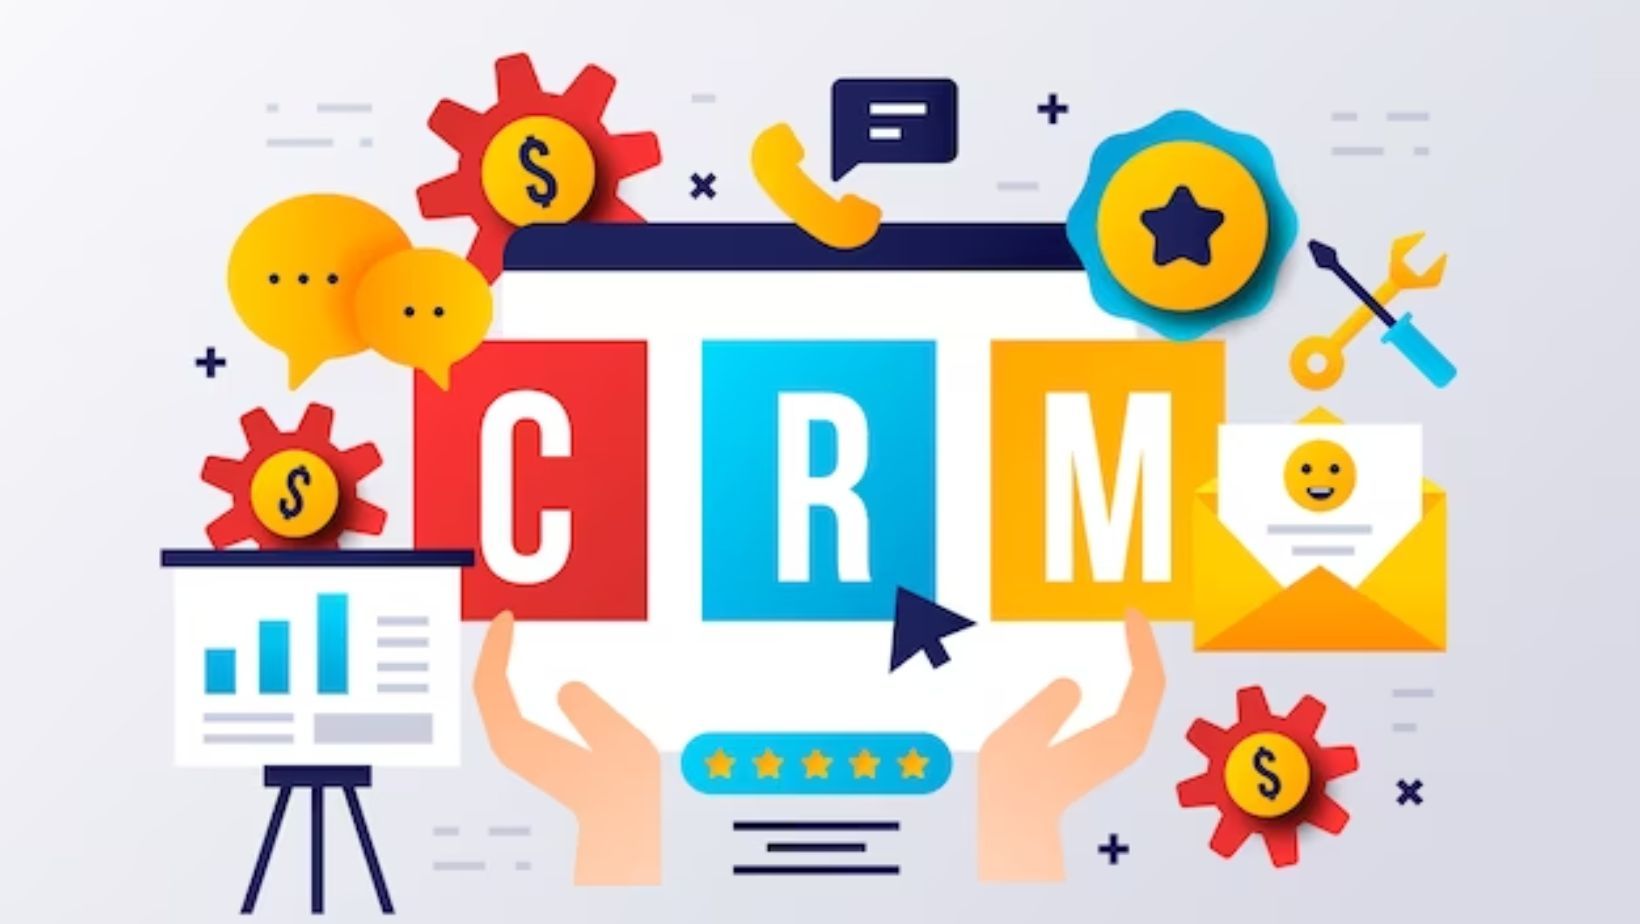 CRM Software Solutions